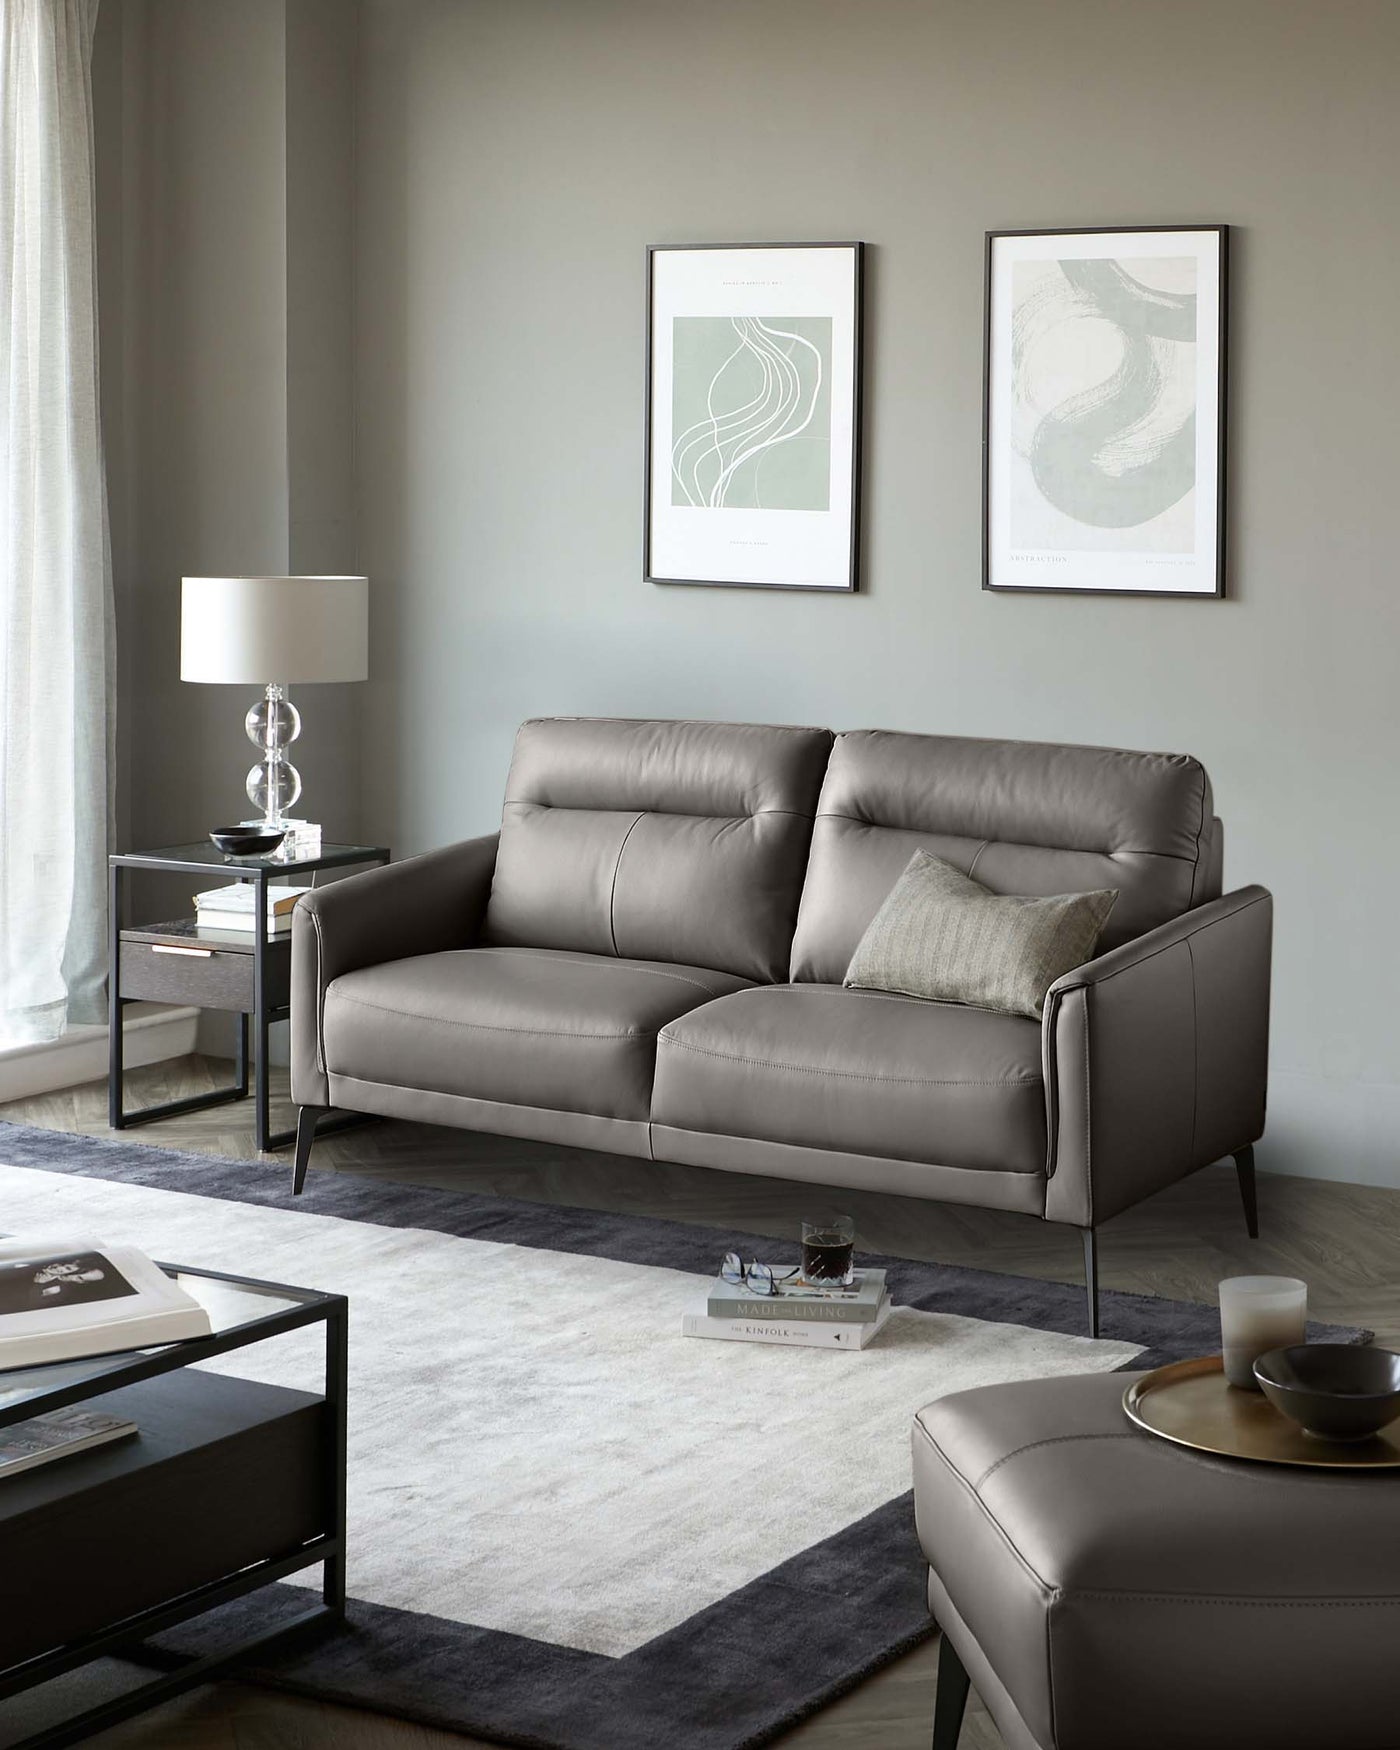 Elegant modern living room furniture featuring a sleek grey leather sofa with clean lines and metal legs, complemented by a matching leather ottoman and minimalist black side tables adorned with contemporary lamps. A modern low-profile coffee table centres the arrangement atop a two-tone grey area rug.